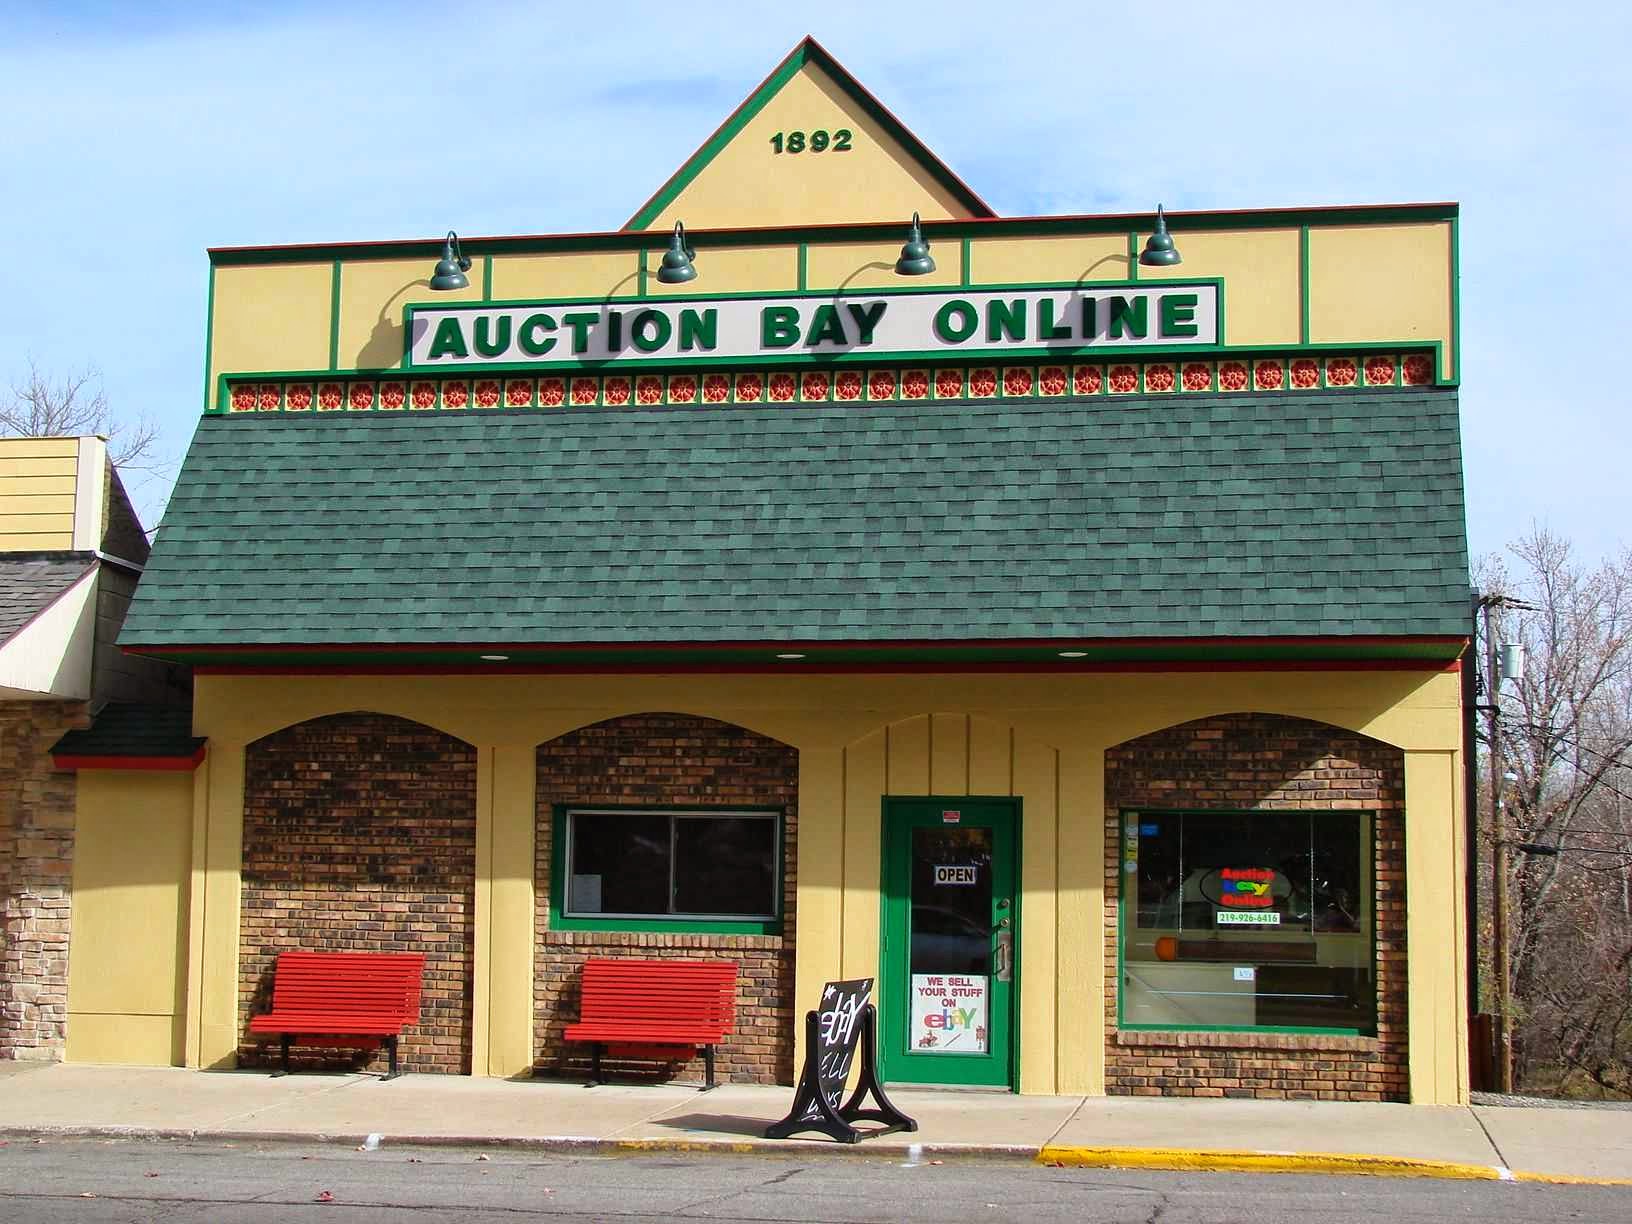 Auction Bay Online